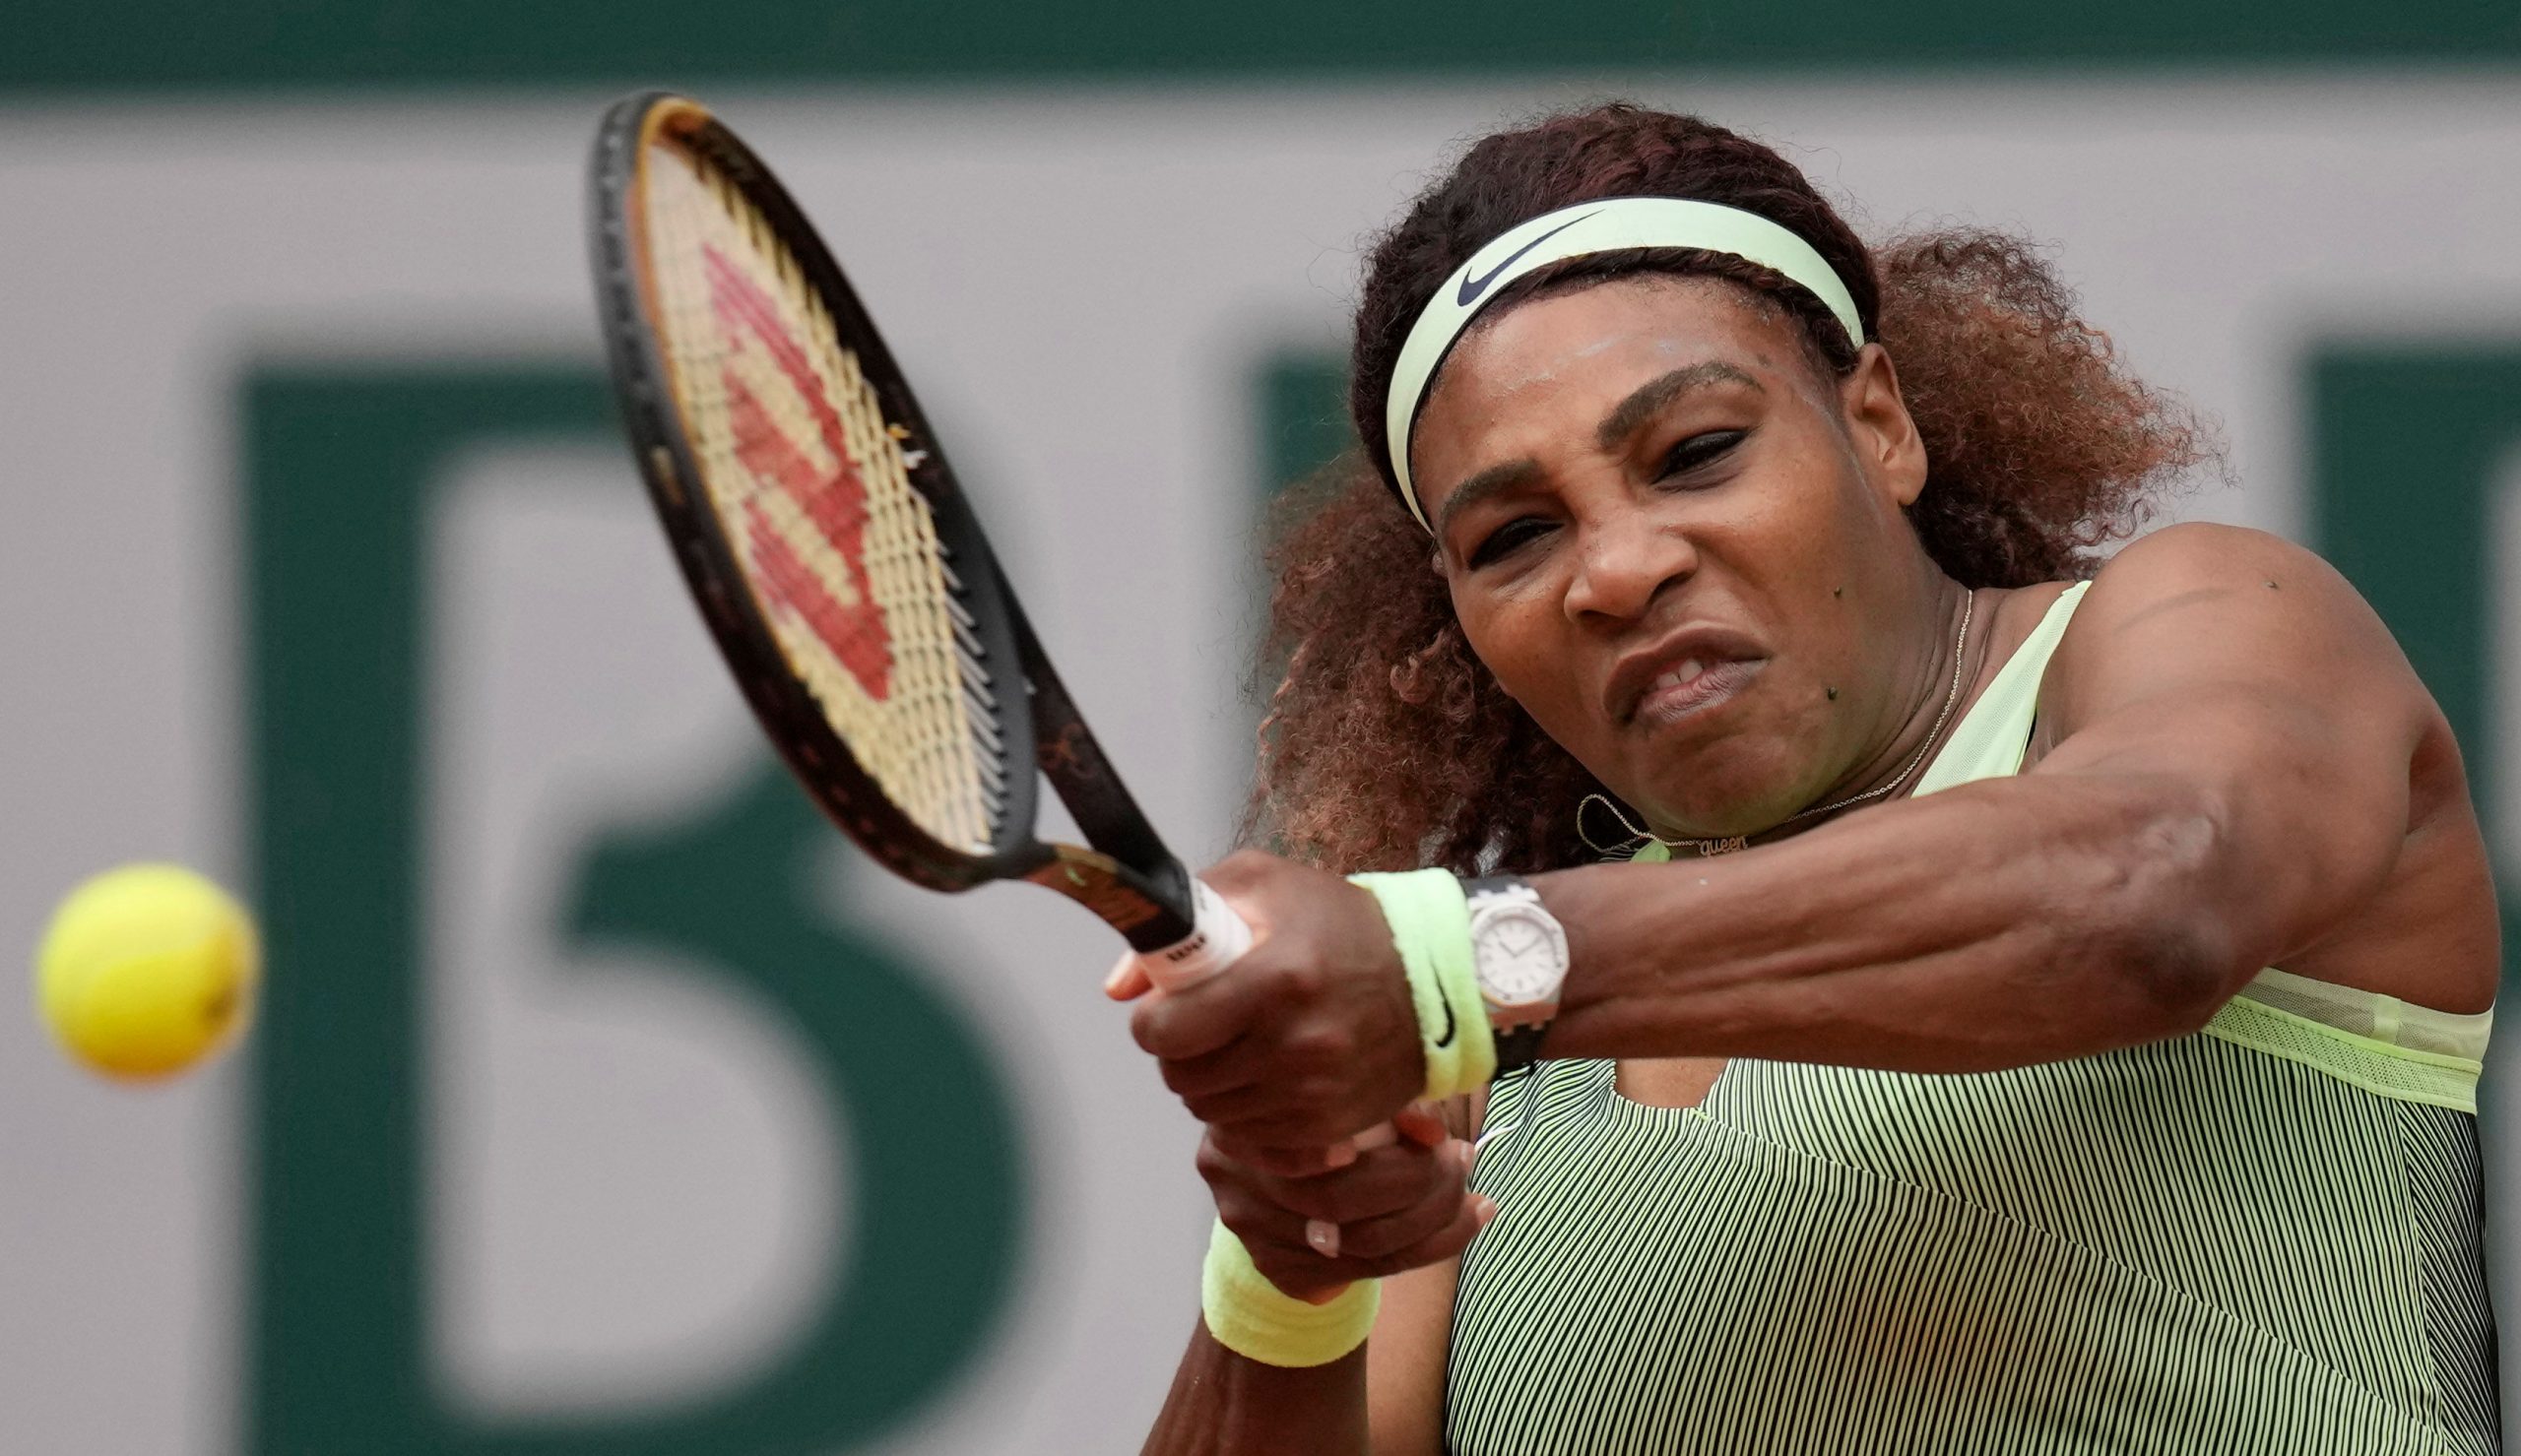 Serena Williams retires injured from first round match at Wimbledon